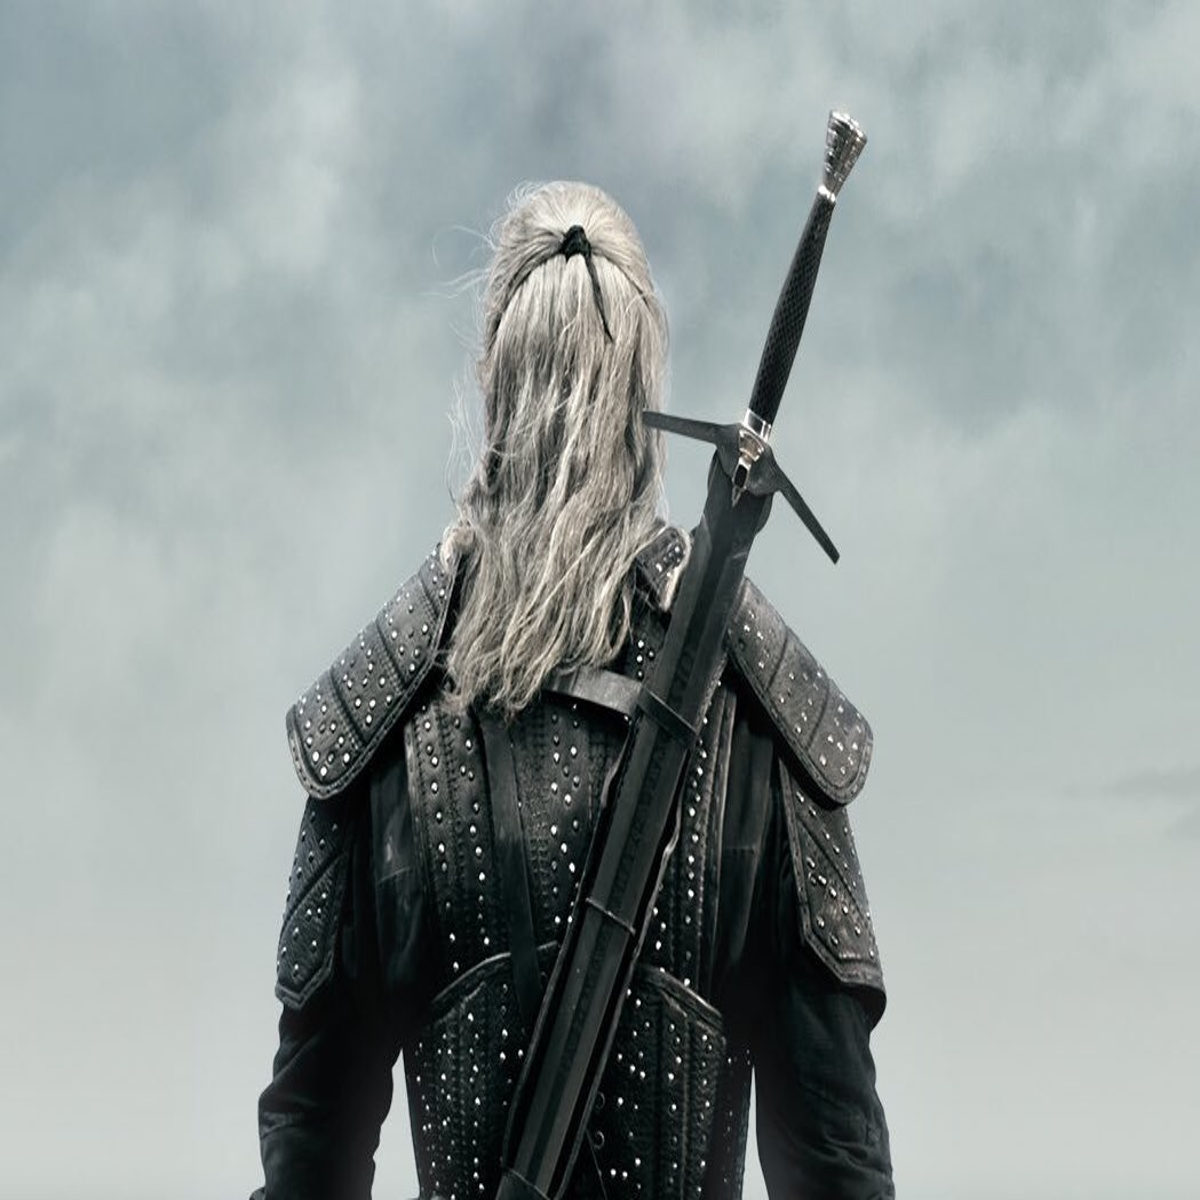 The Witcher season 3: Release date predictions & everything we know so far